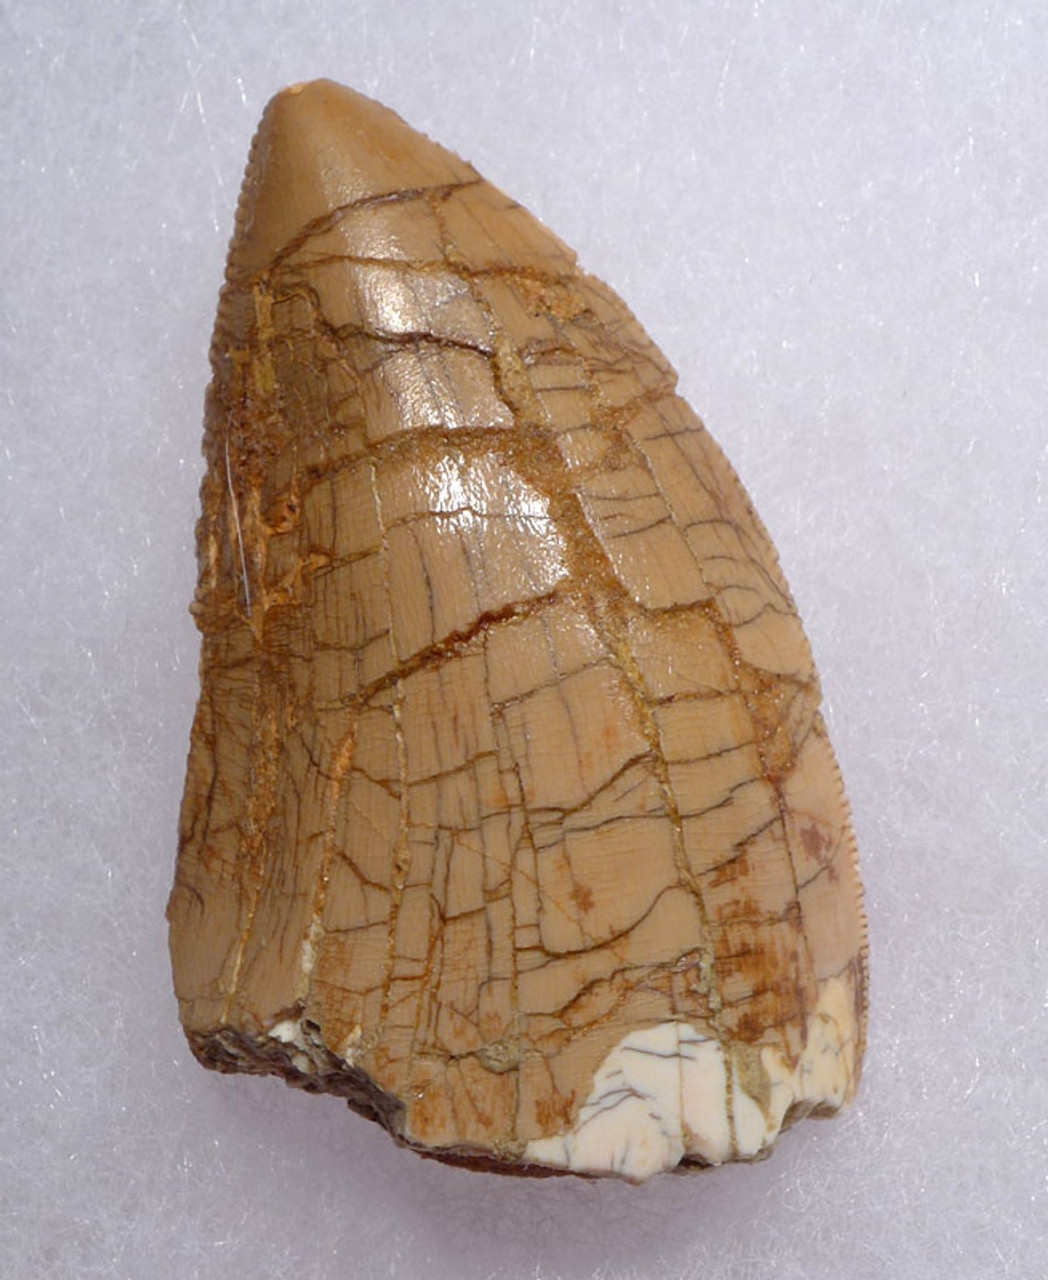 DT2-091 - CARCHARODONTOSAURUS FOSSIL TOOTH FROM THE LARGEST MEAT-EATING DINOSAUR 